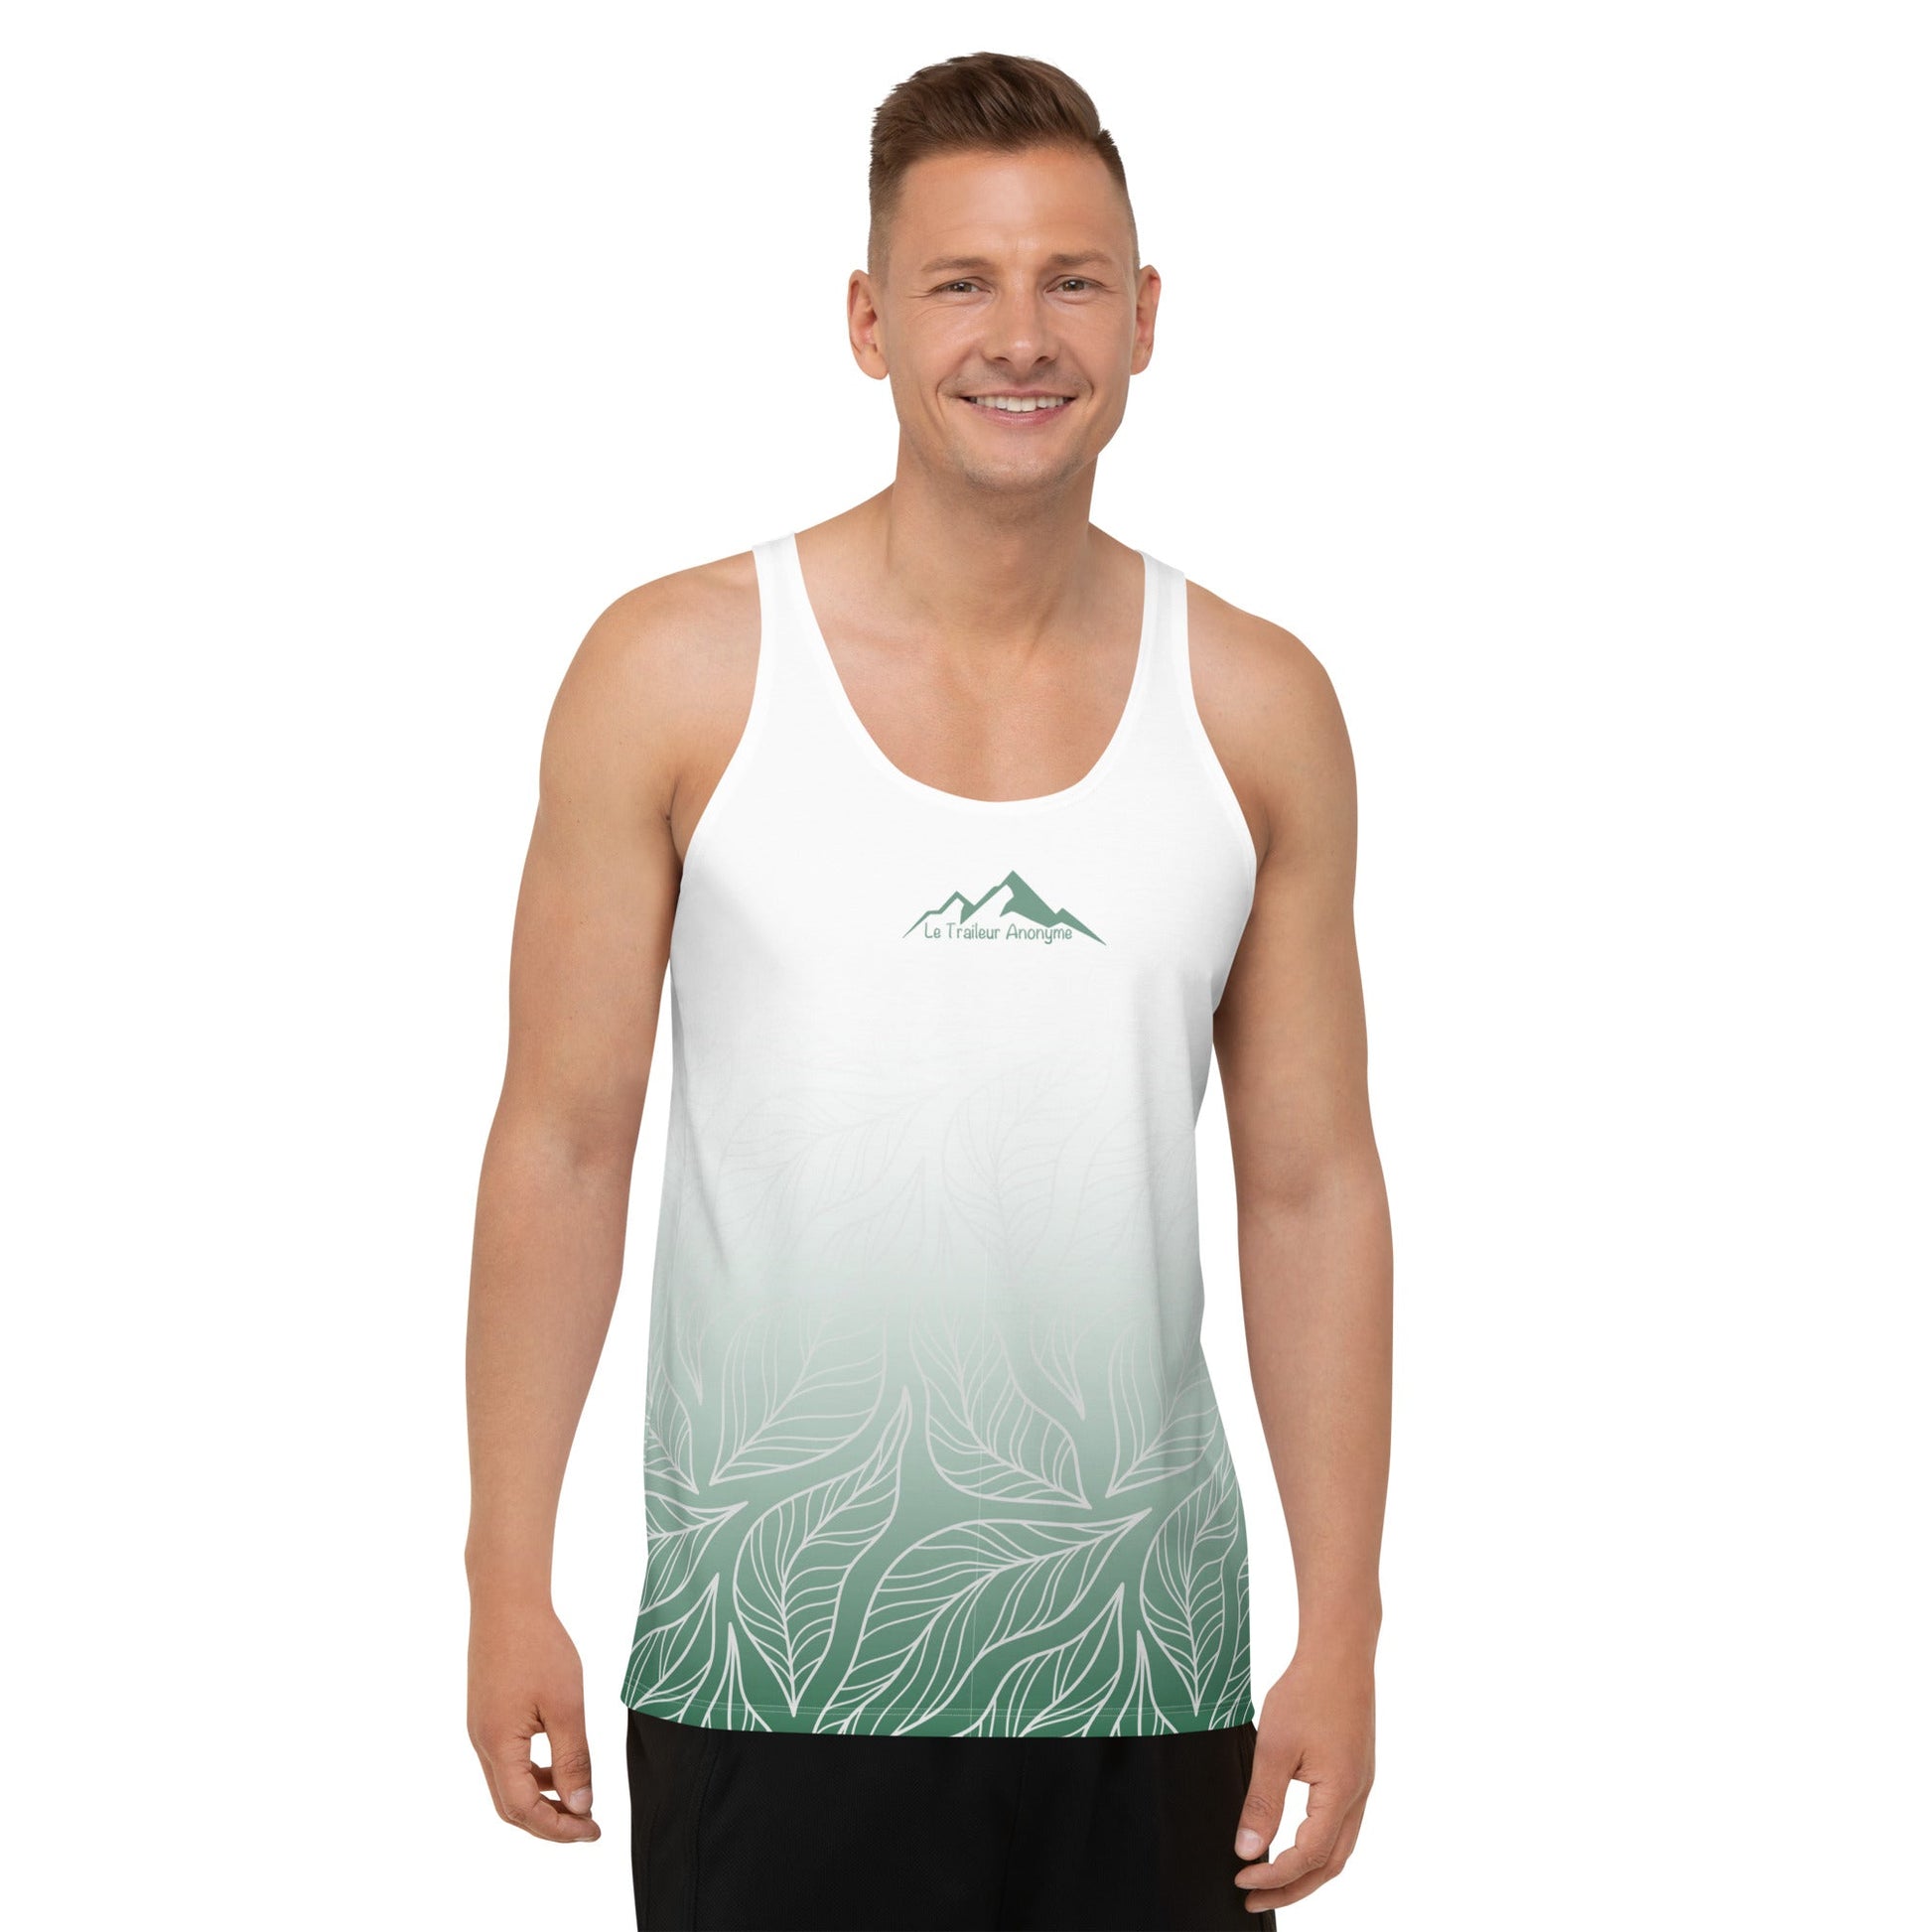 Débardeur Running Homme - Green Forest - Le Traileur Anonyme